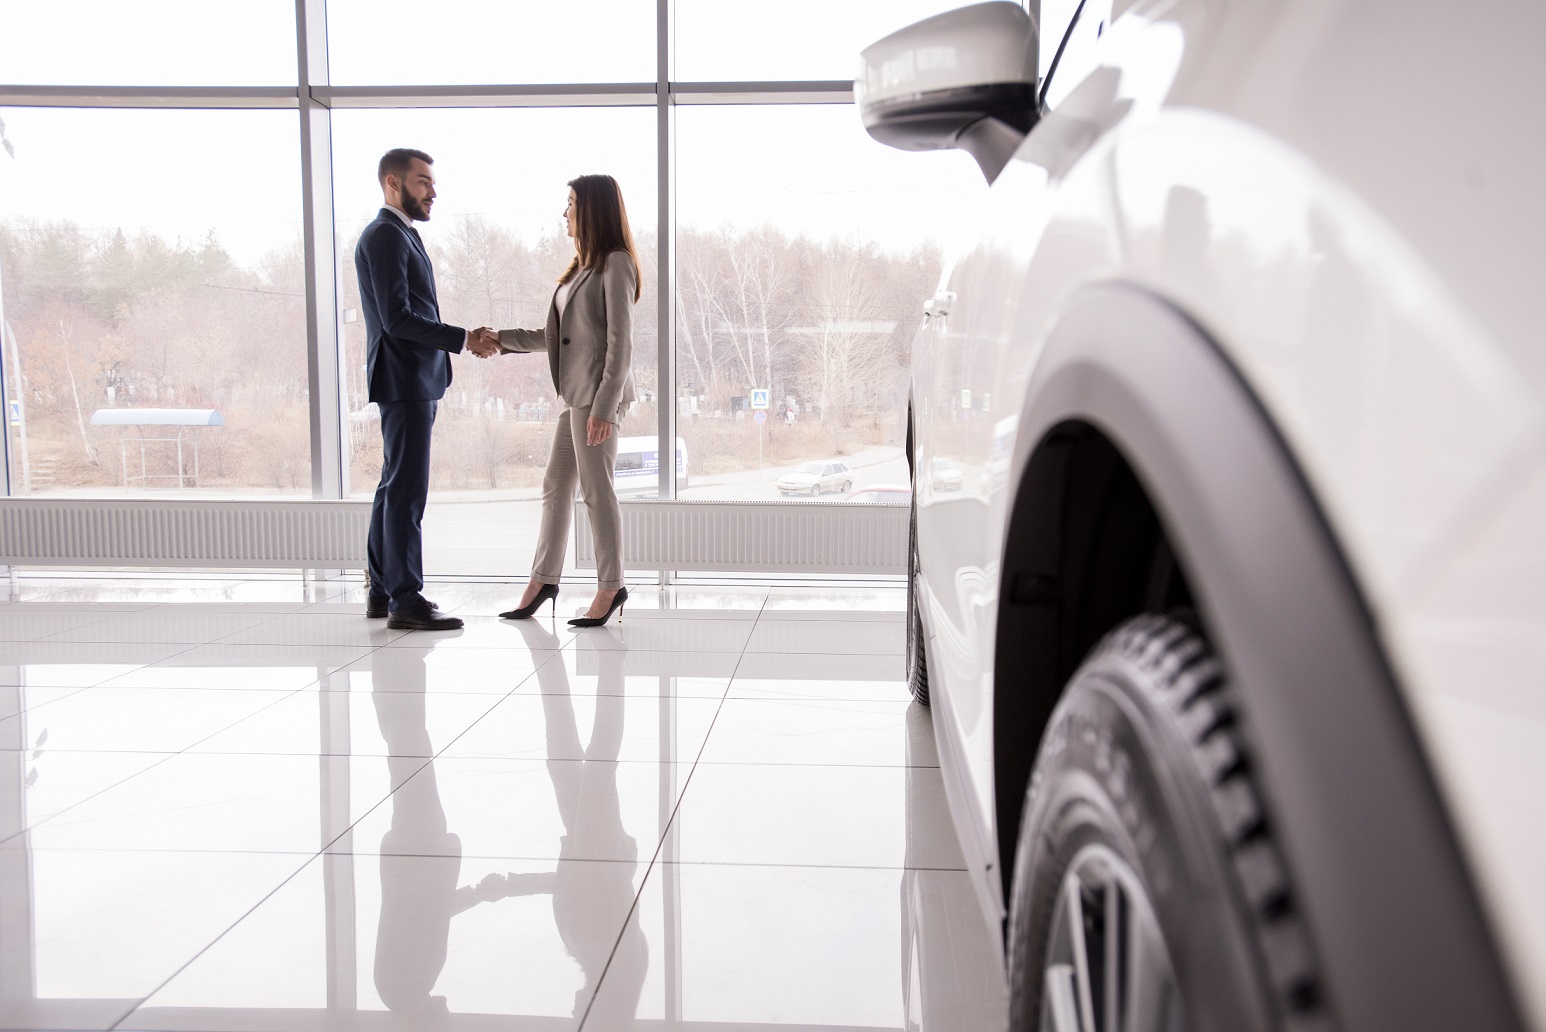 Not too fast! Here’s what you should know about financing a car before securing your deal for new wheels.